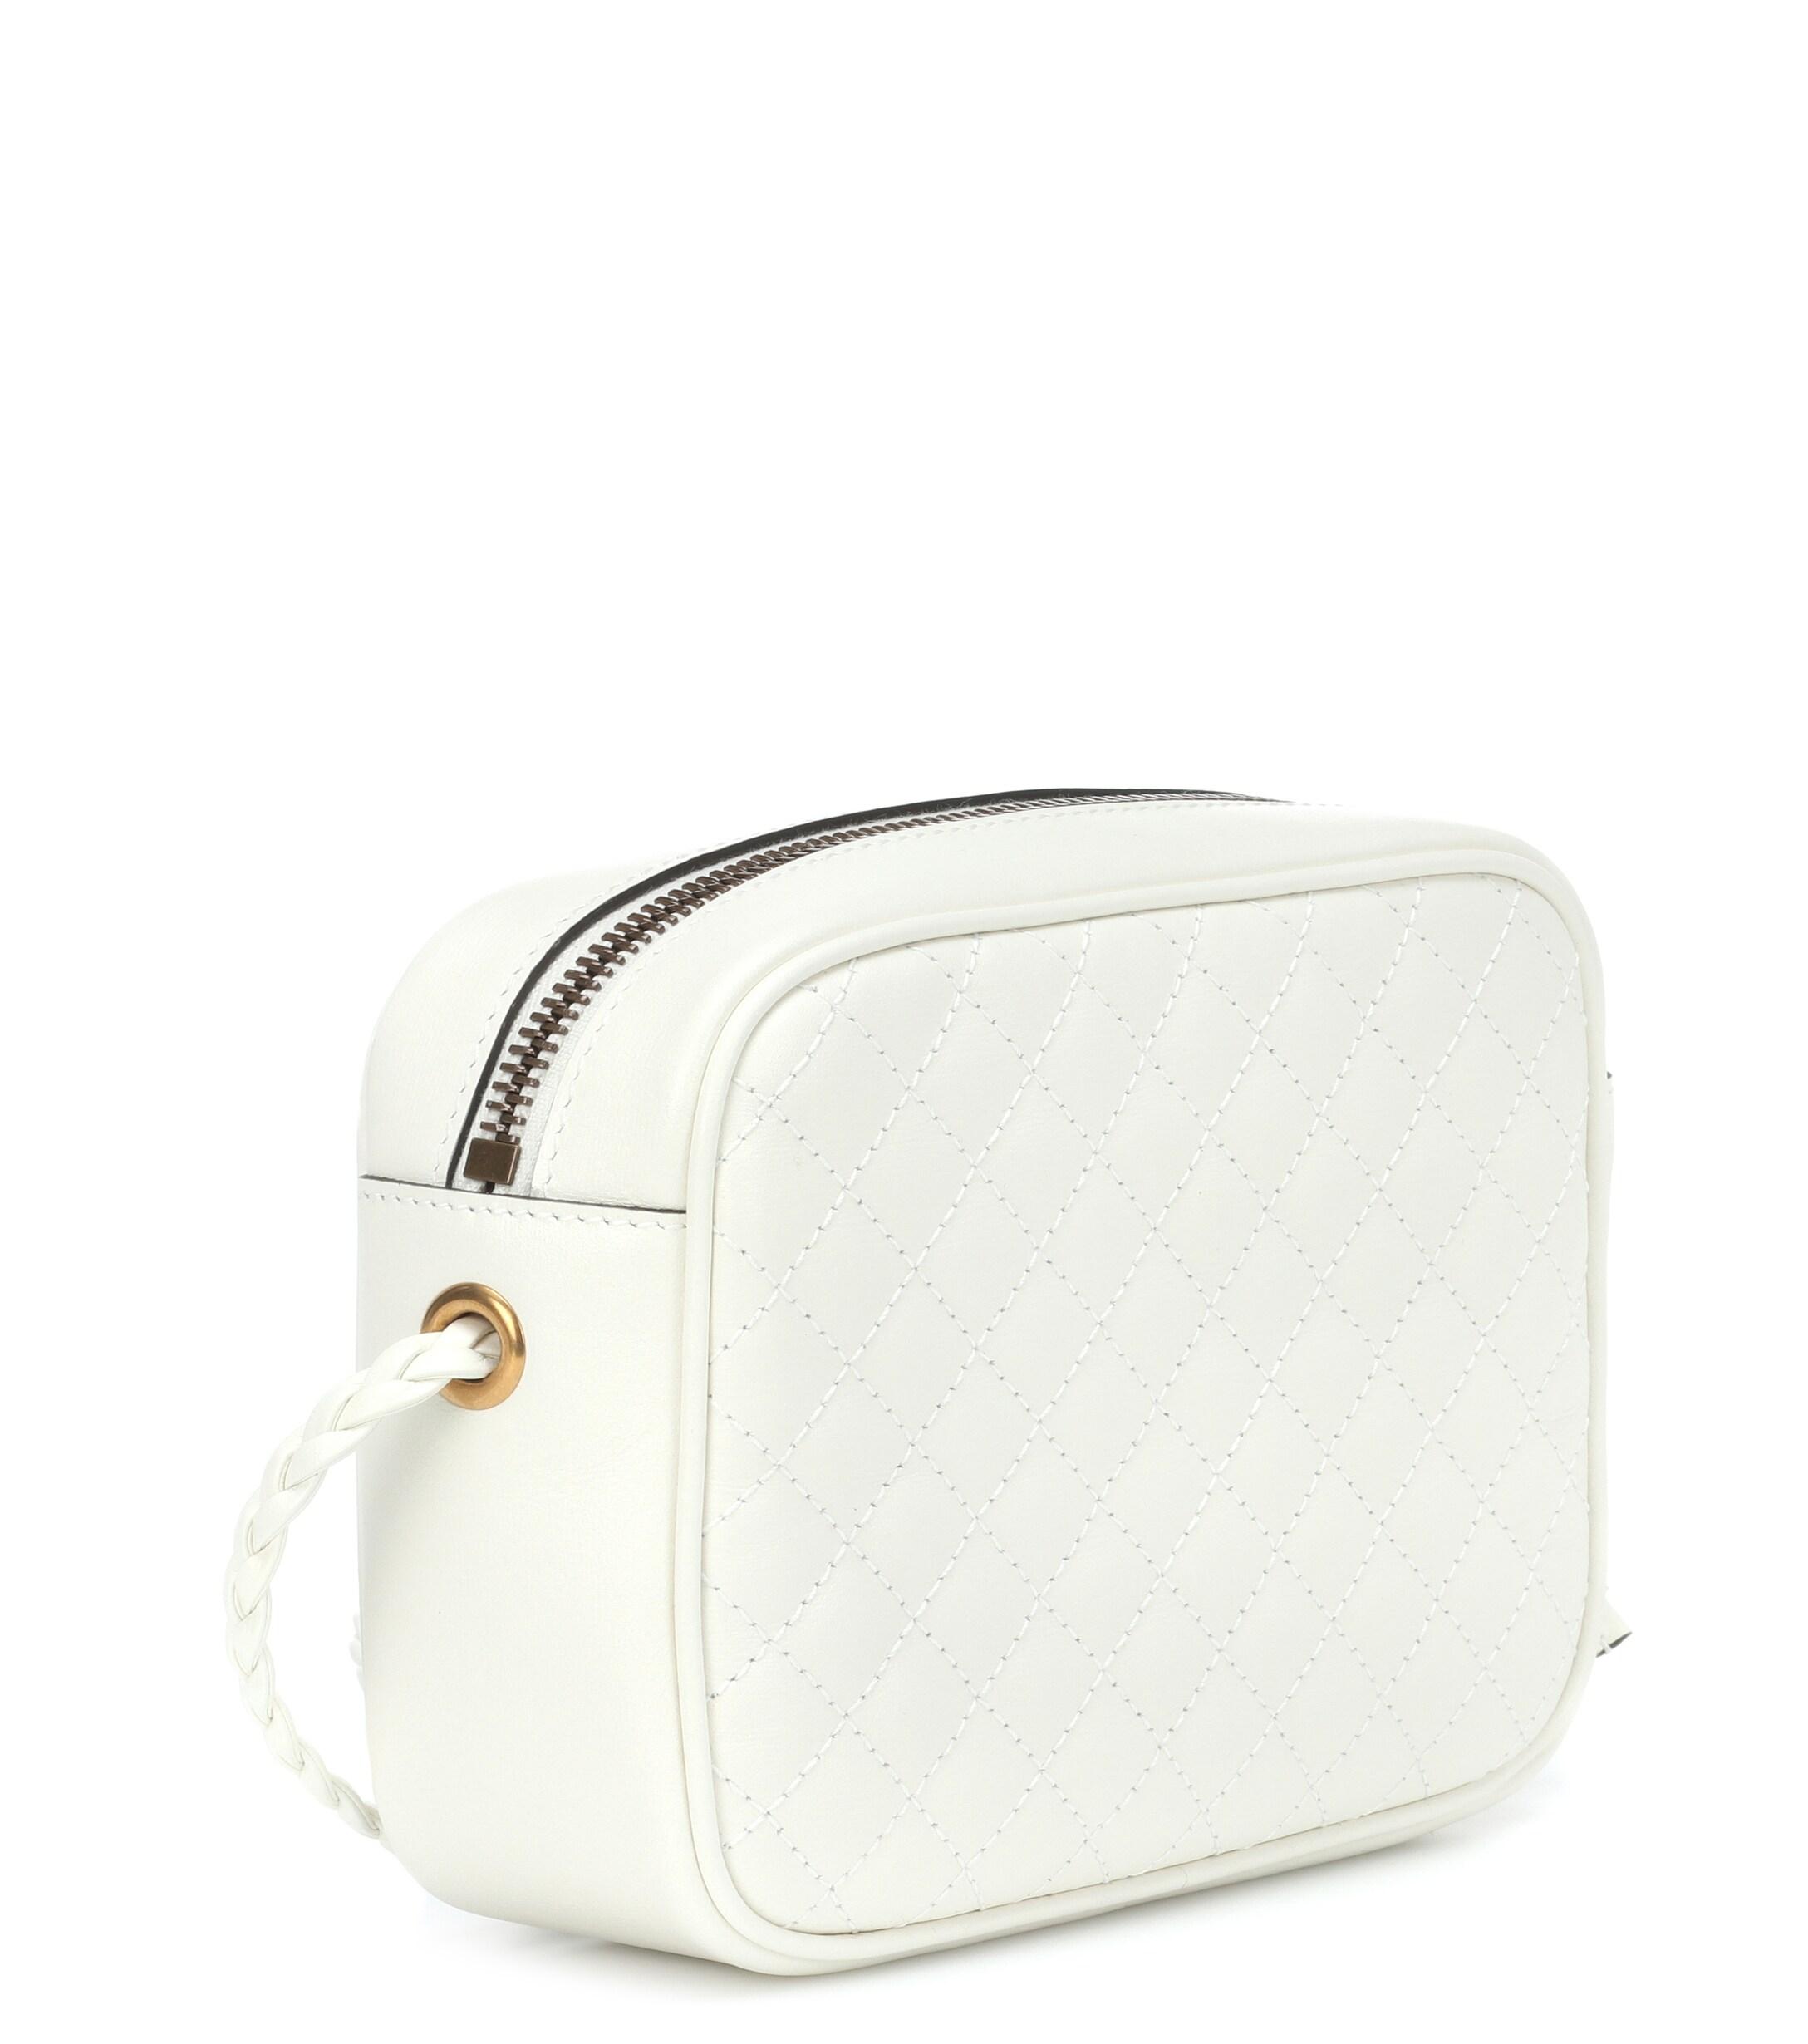 Gucci Quilted Leather Shoulder Bag in White - Save 19% - Lyst